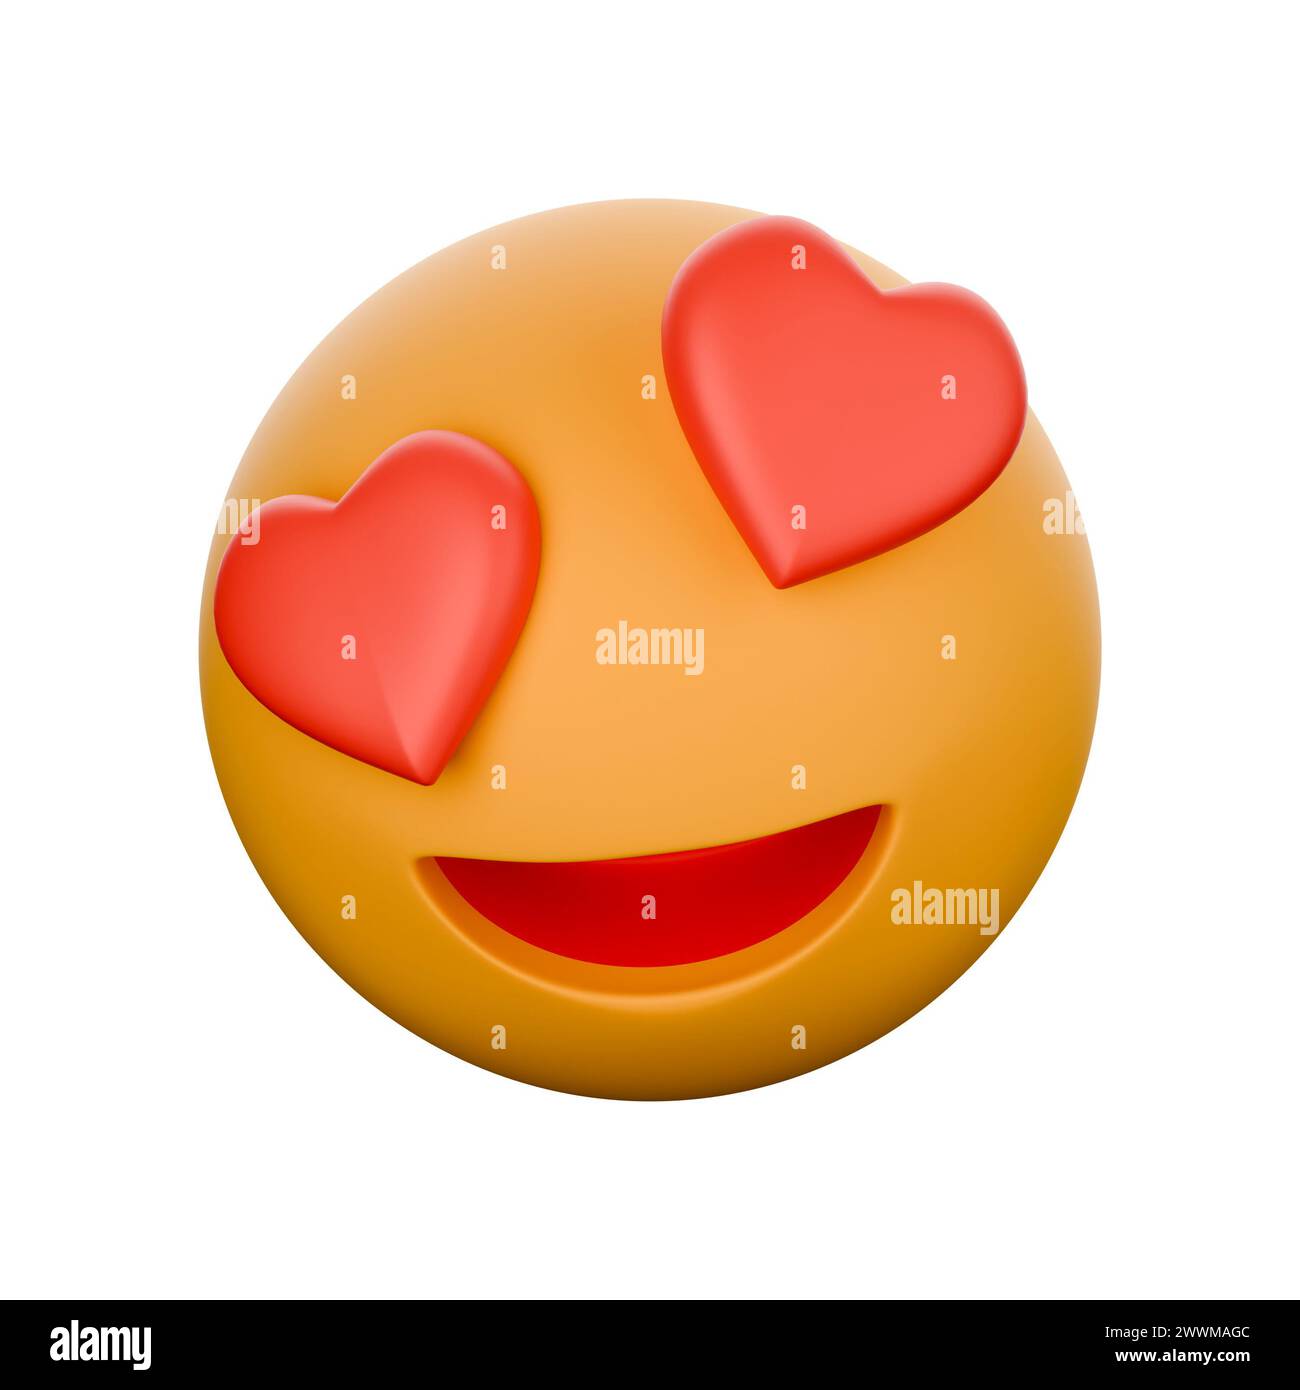 Emoji smiley face with heart eyes 3D rendering on white background have work path. Stock Photo